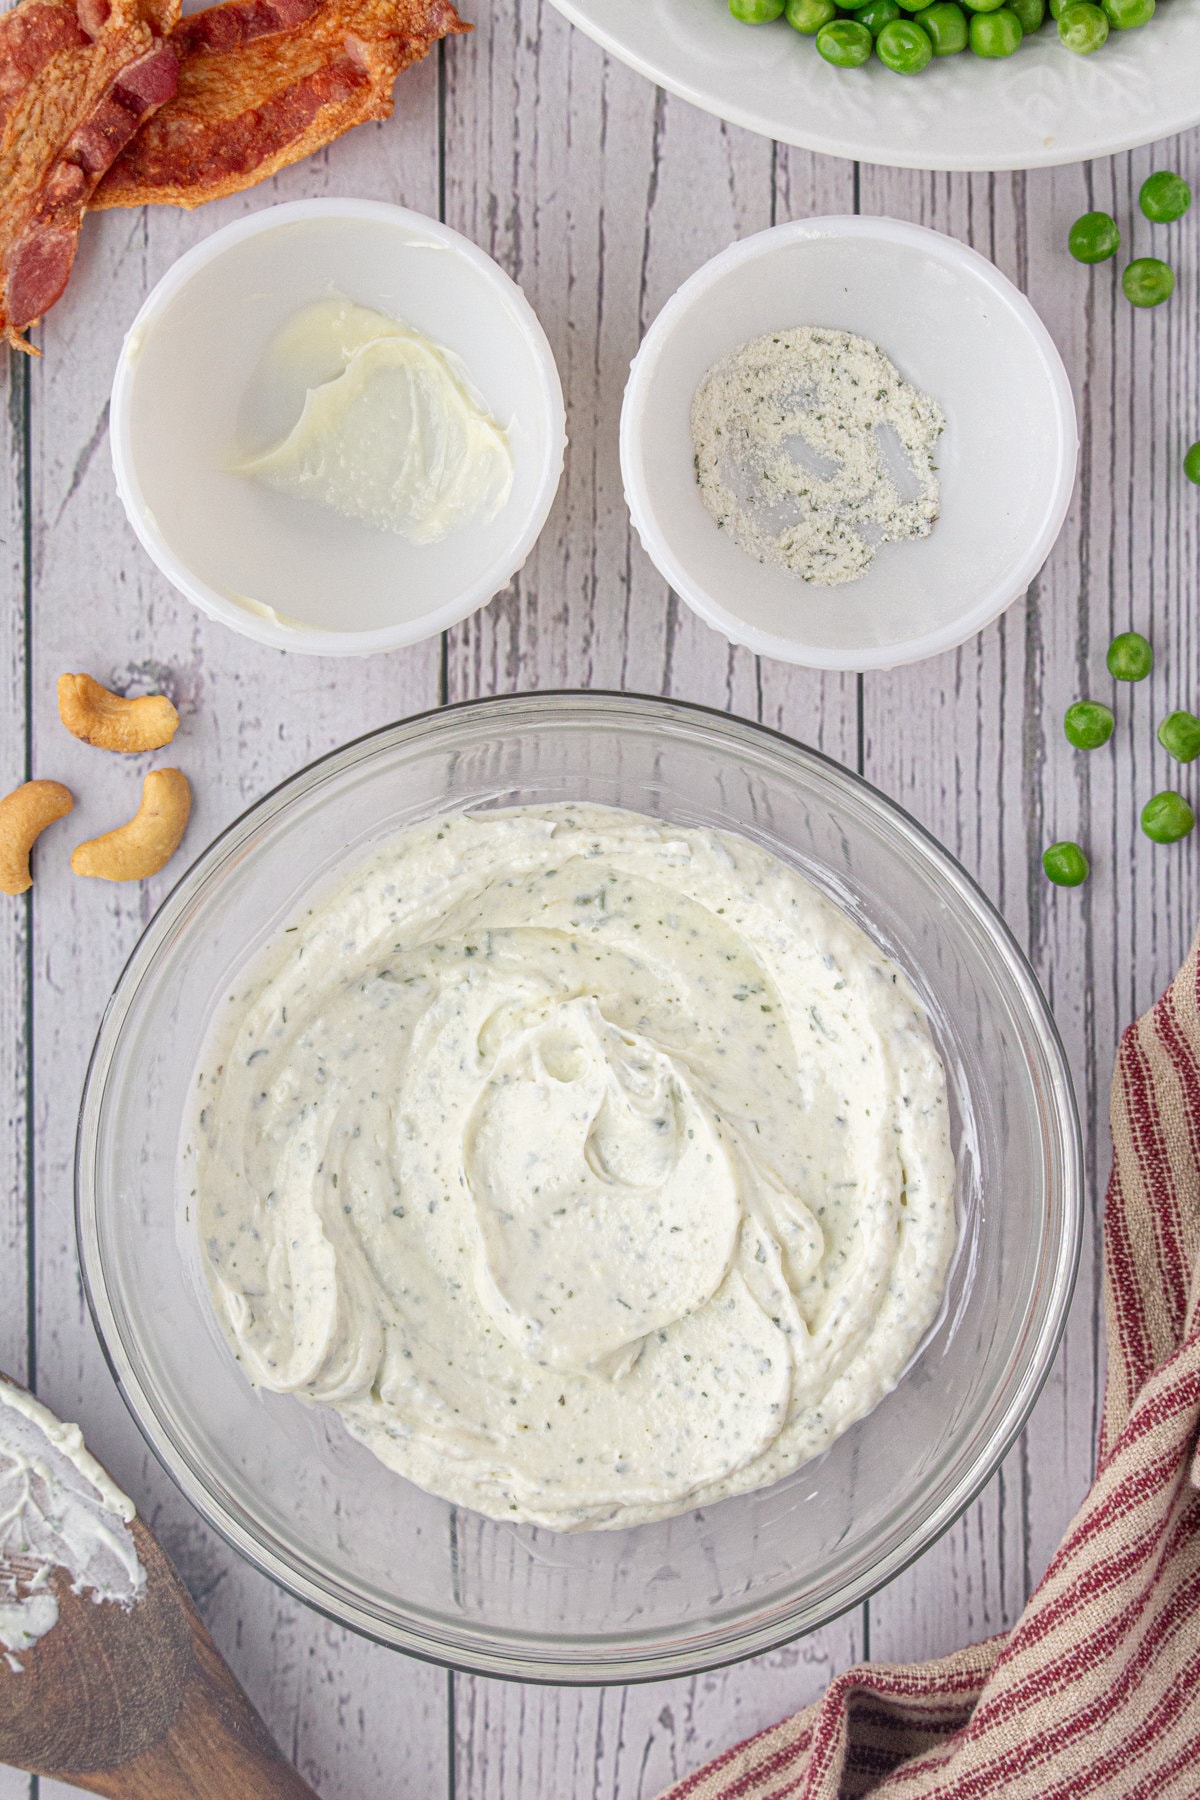 The sour cream, mayo, and Ranch dressing mix combined in a bowl.